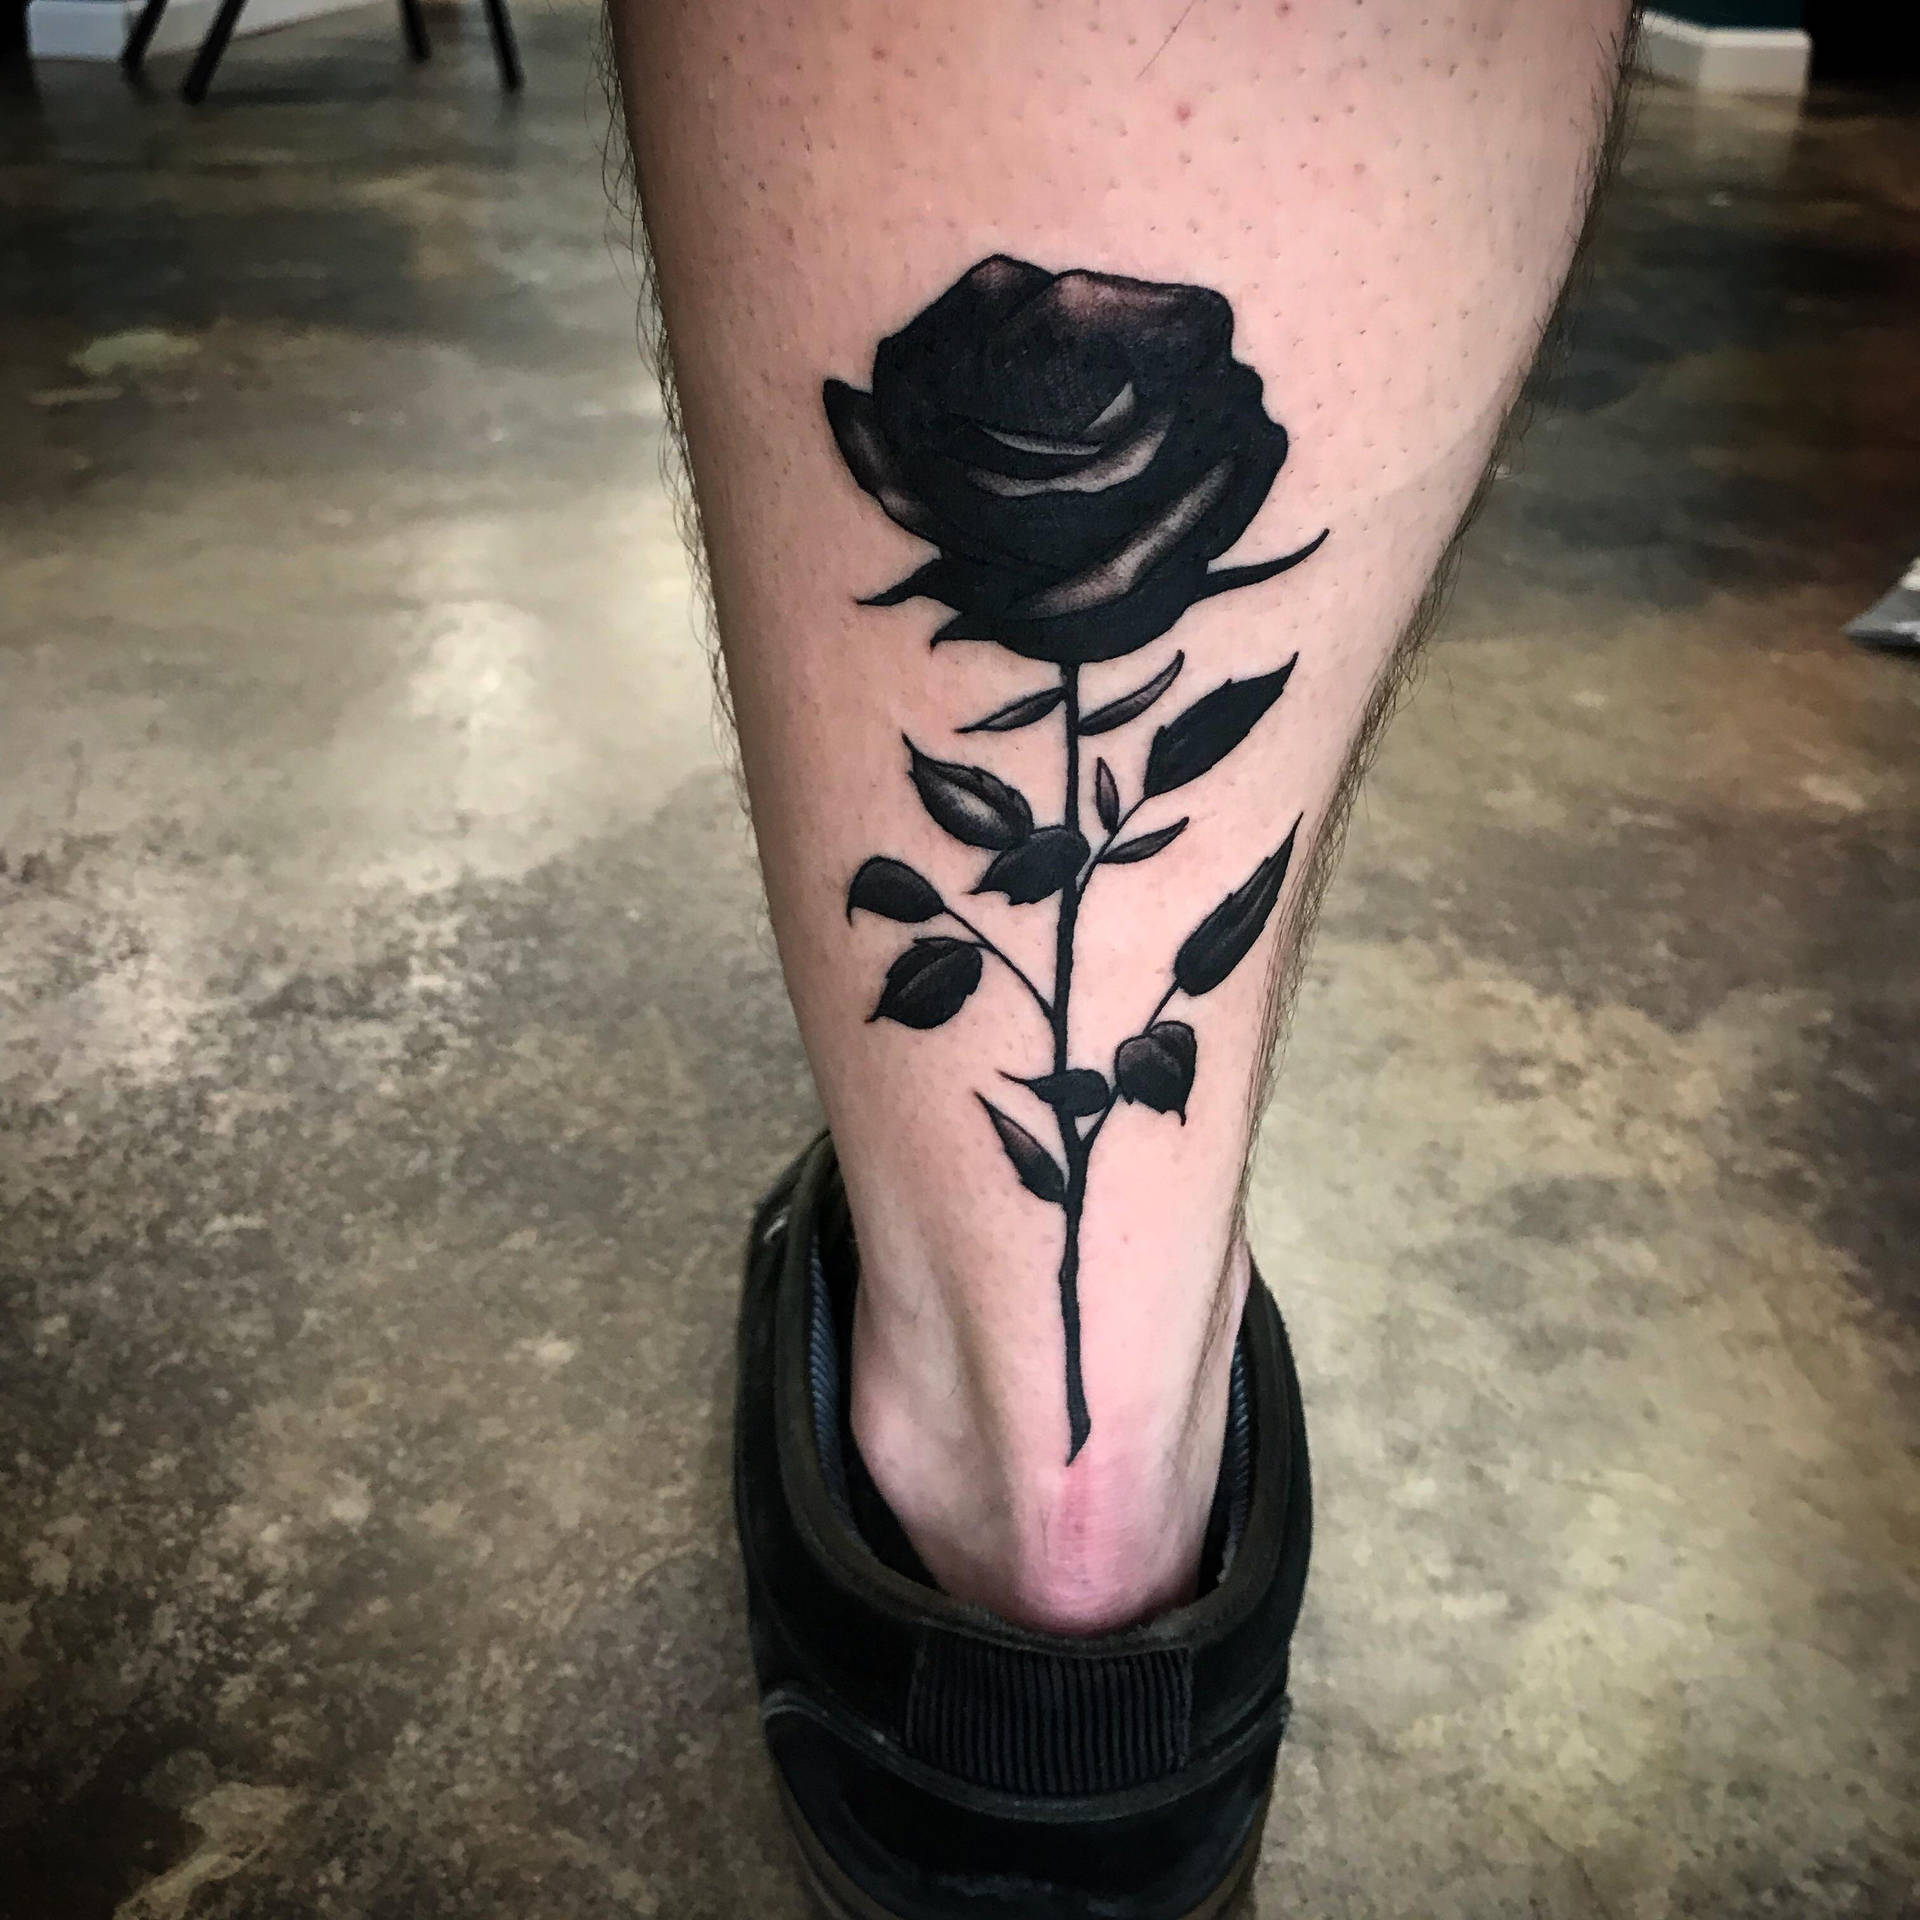 26 Trending Black Rose Tattoo Designs For This Year